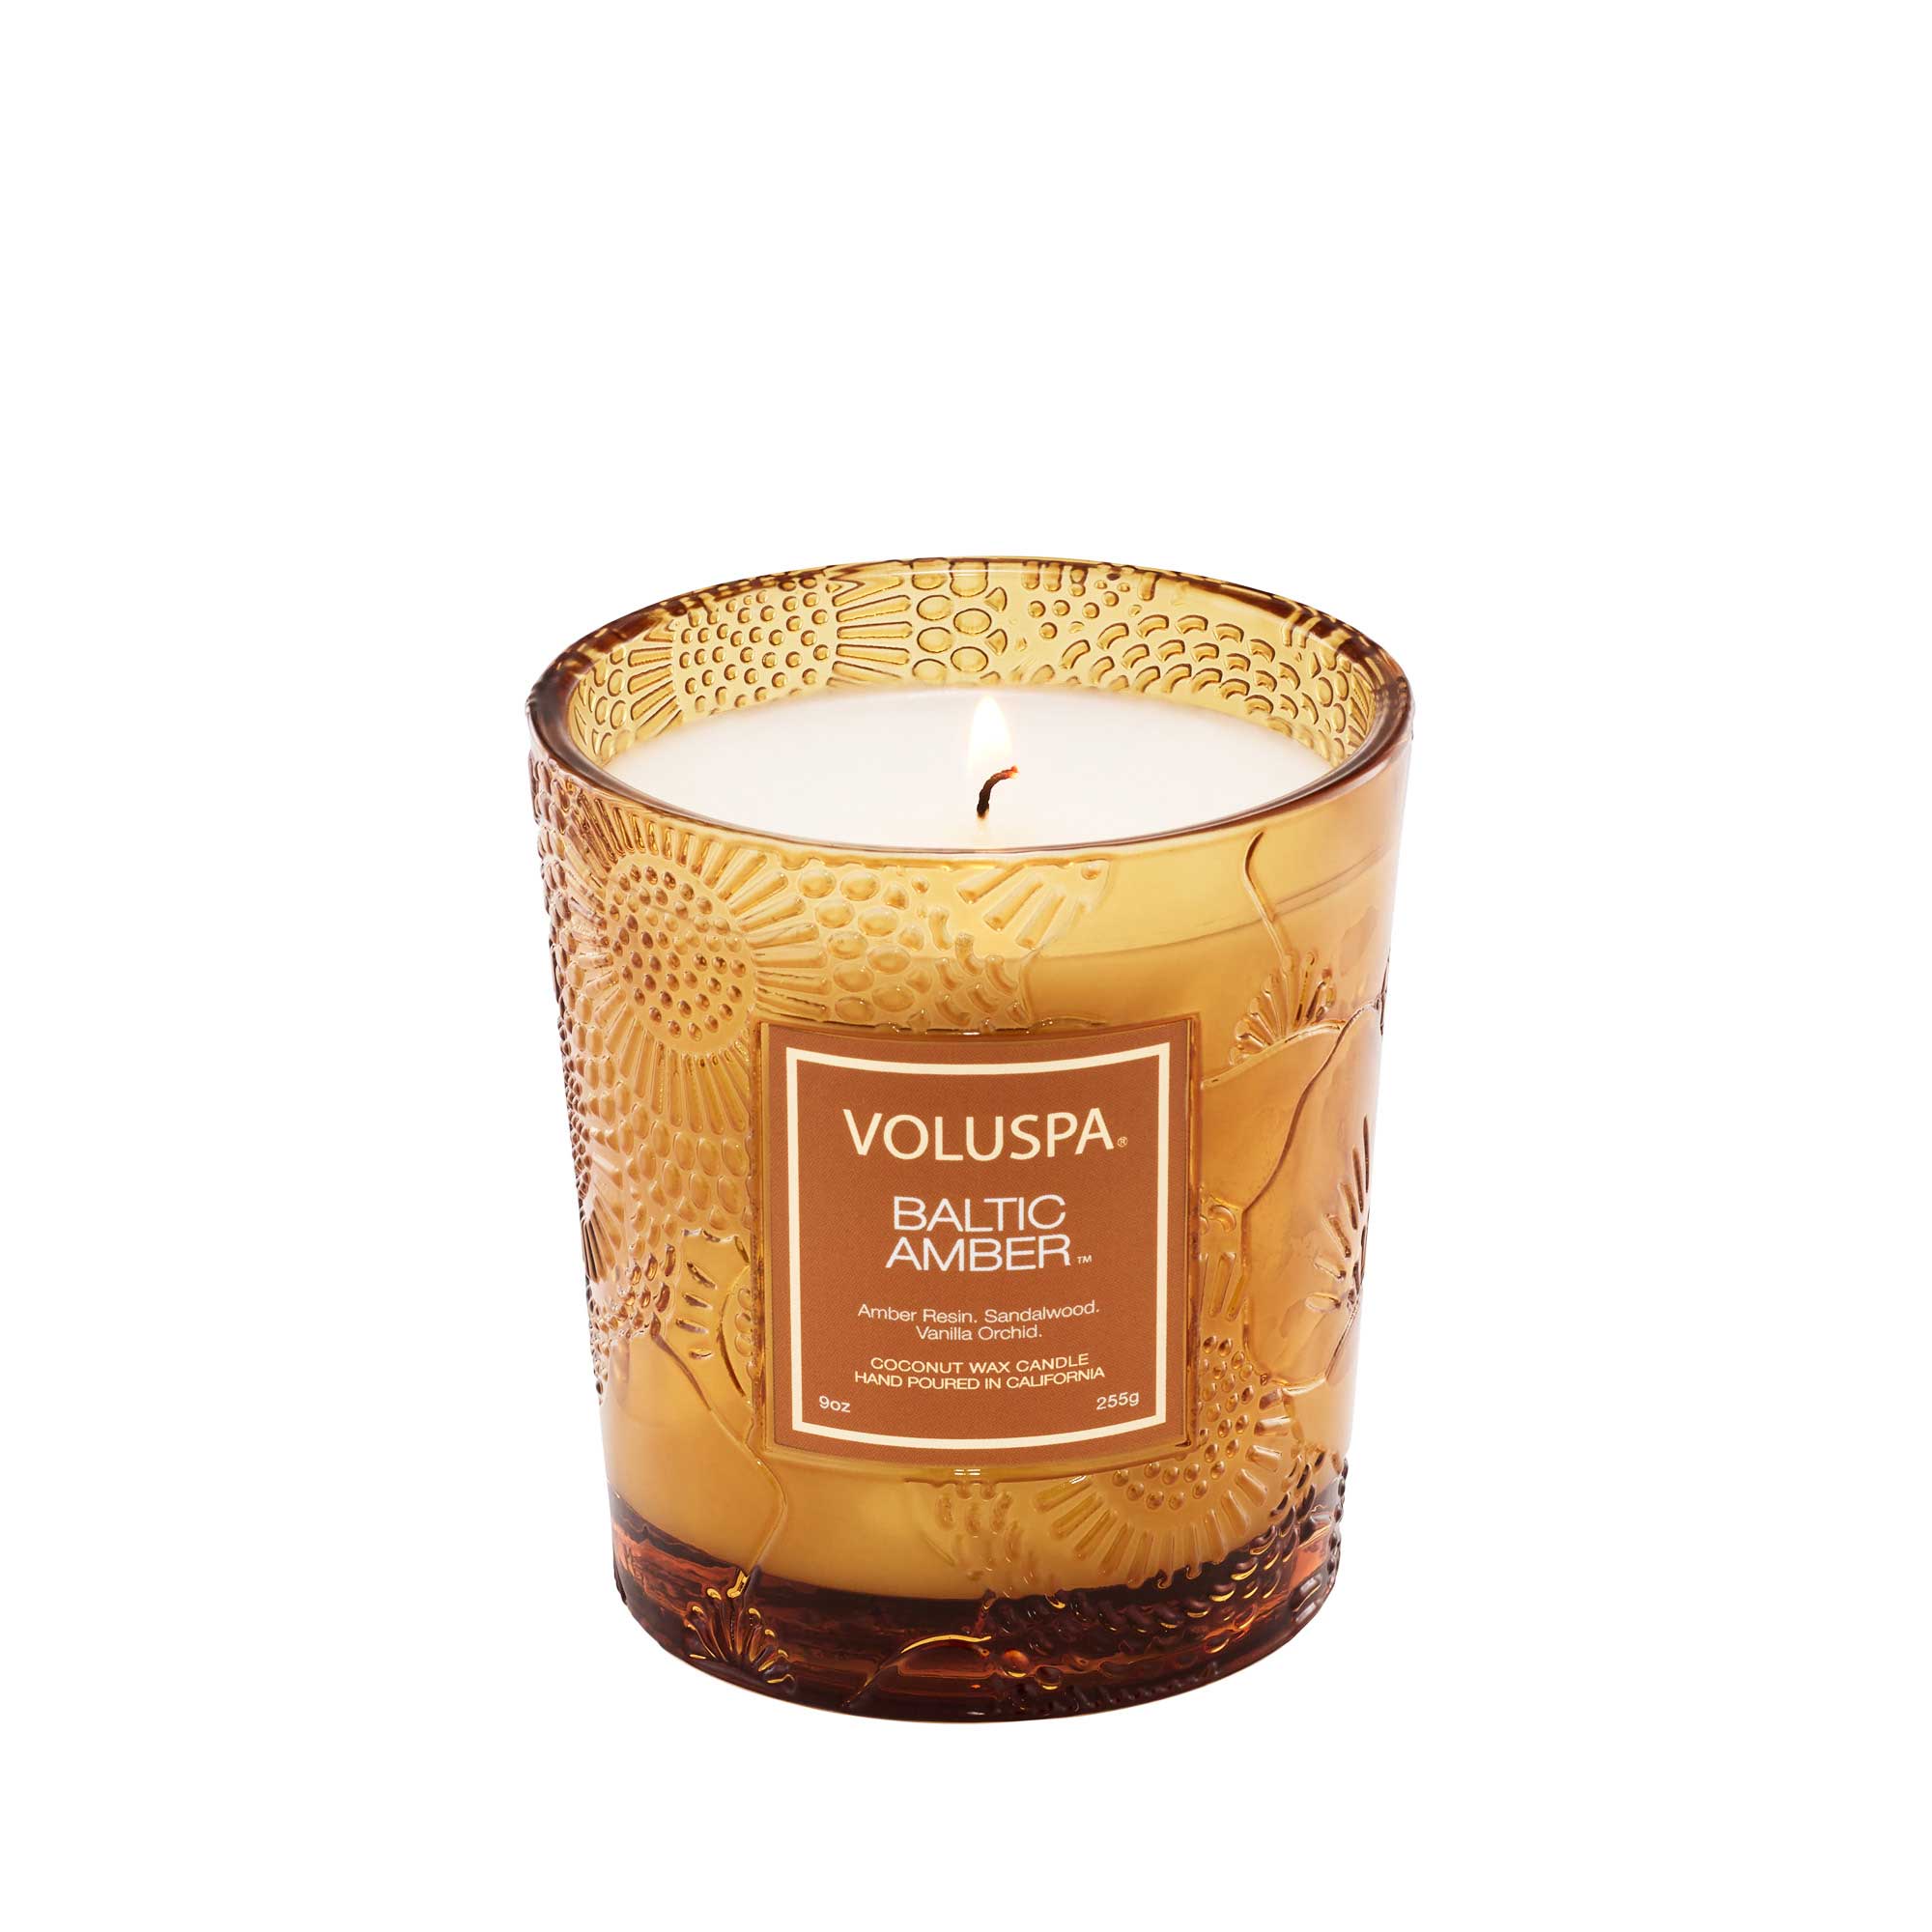 Voluspa Limited Edition XXV Anniversary Collection Boxed Classic Candle - 9oz / BALTIC AMBER